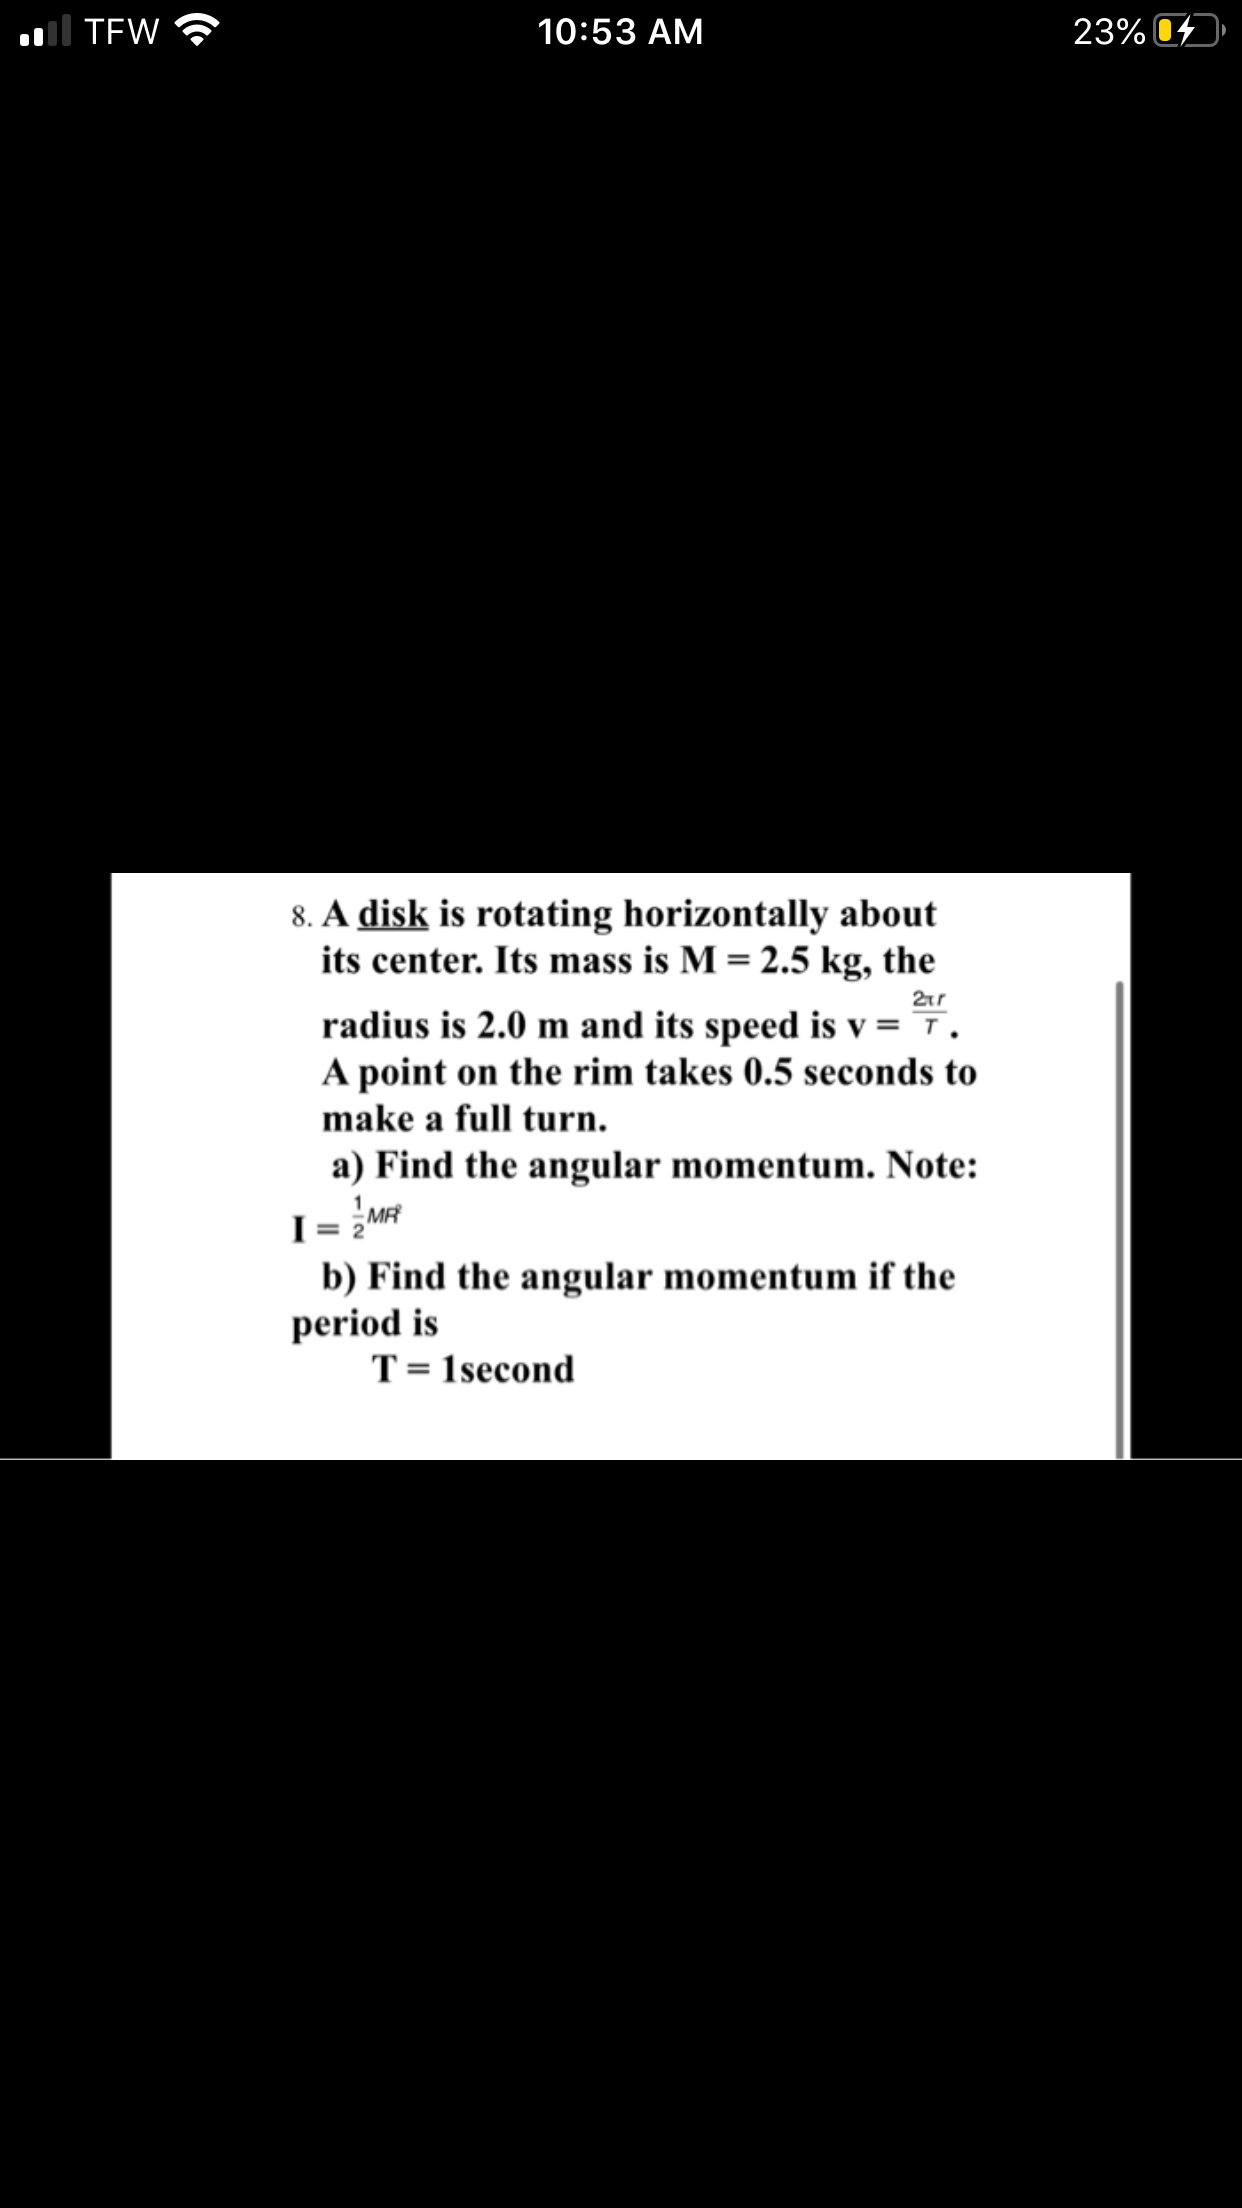 8. A disk is rotating horizontally about
its center. Its mass is M = 2.5 kg, the
radius is 2.0 m and its speed is v = 7.
A point on the rim takes 0.5 seconds to
make a full turn.
a) Find the angular momentum. Note:
I = 2M
b) Find the angular momentum if the
period is
T= 1second
